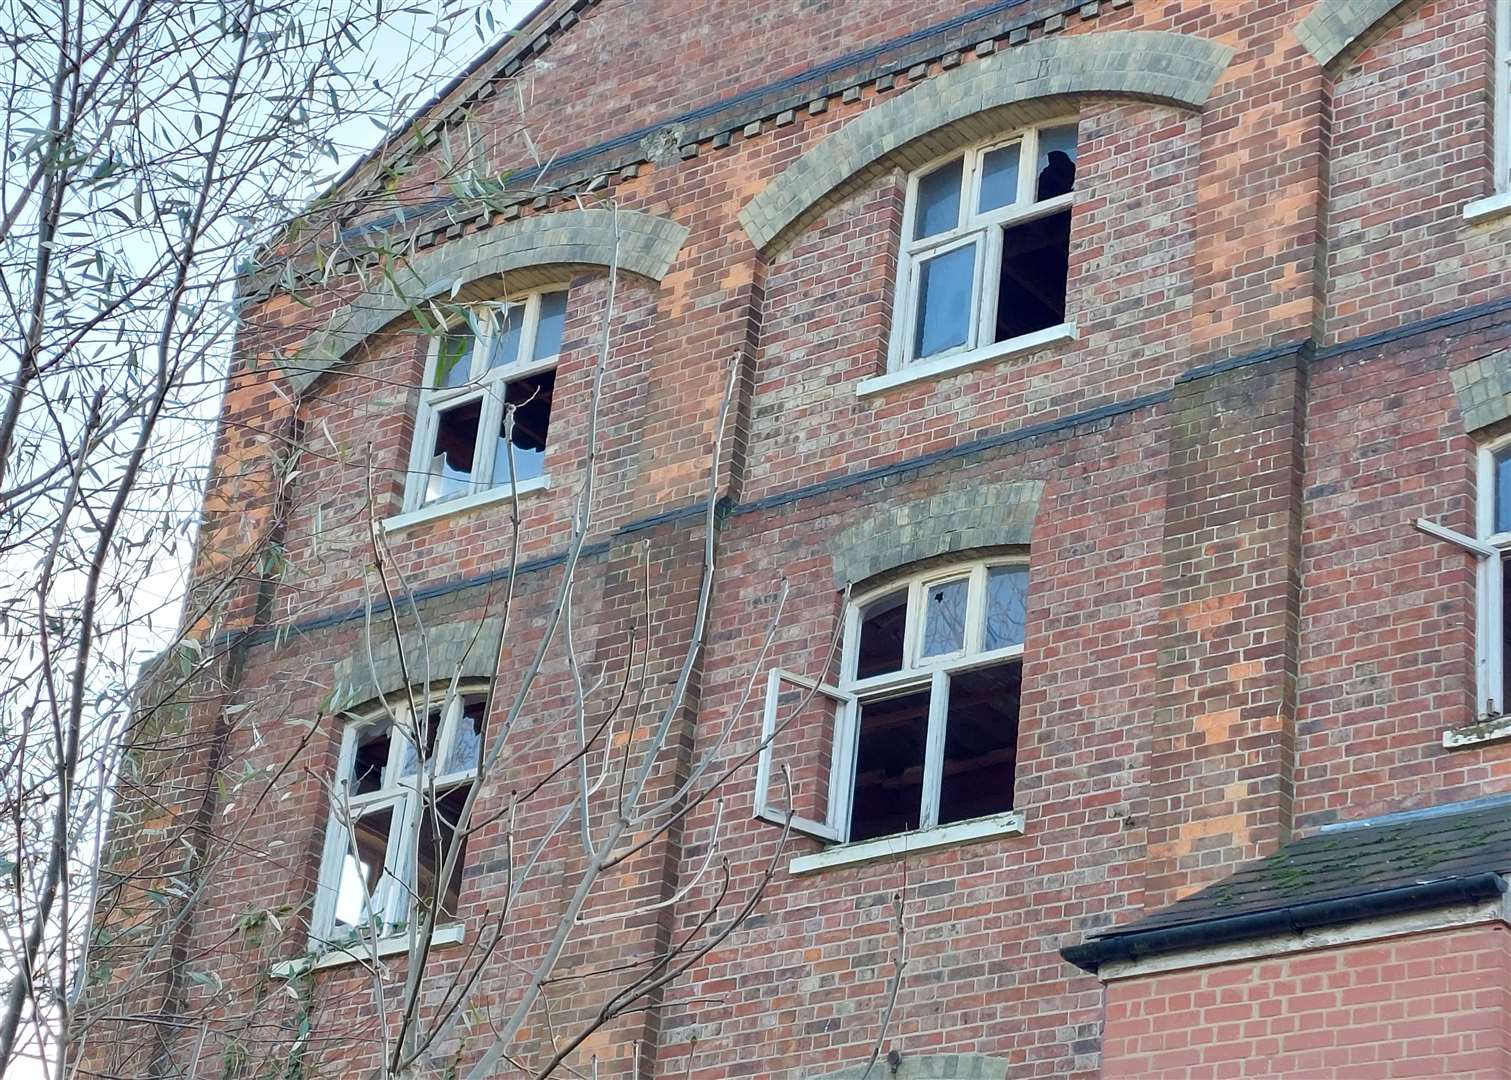 Almost every window is smashed at the East Hill building